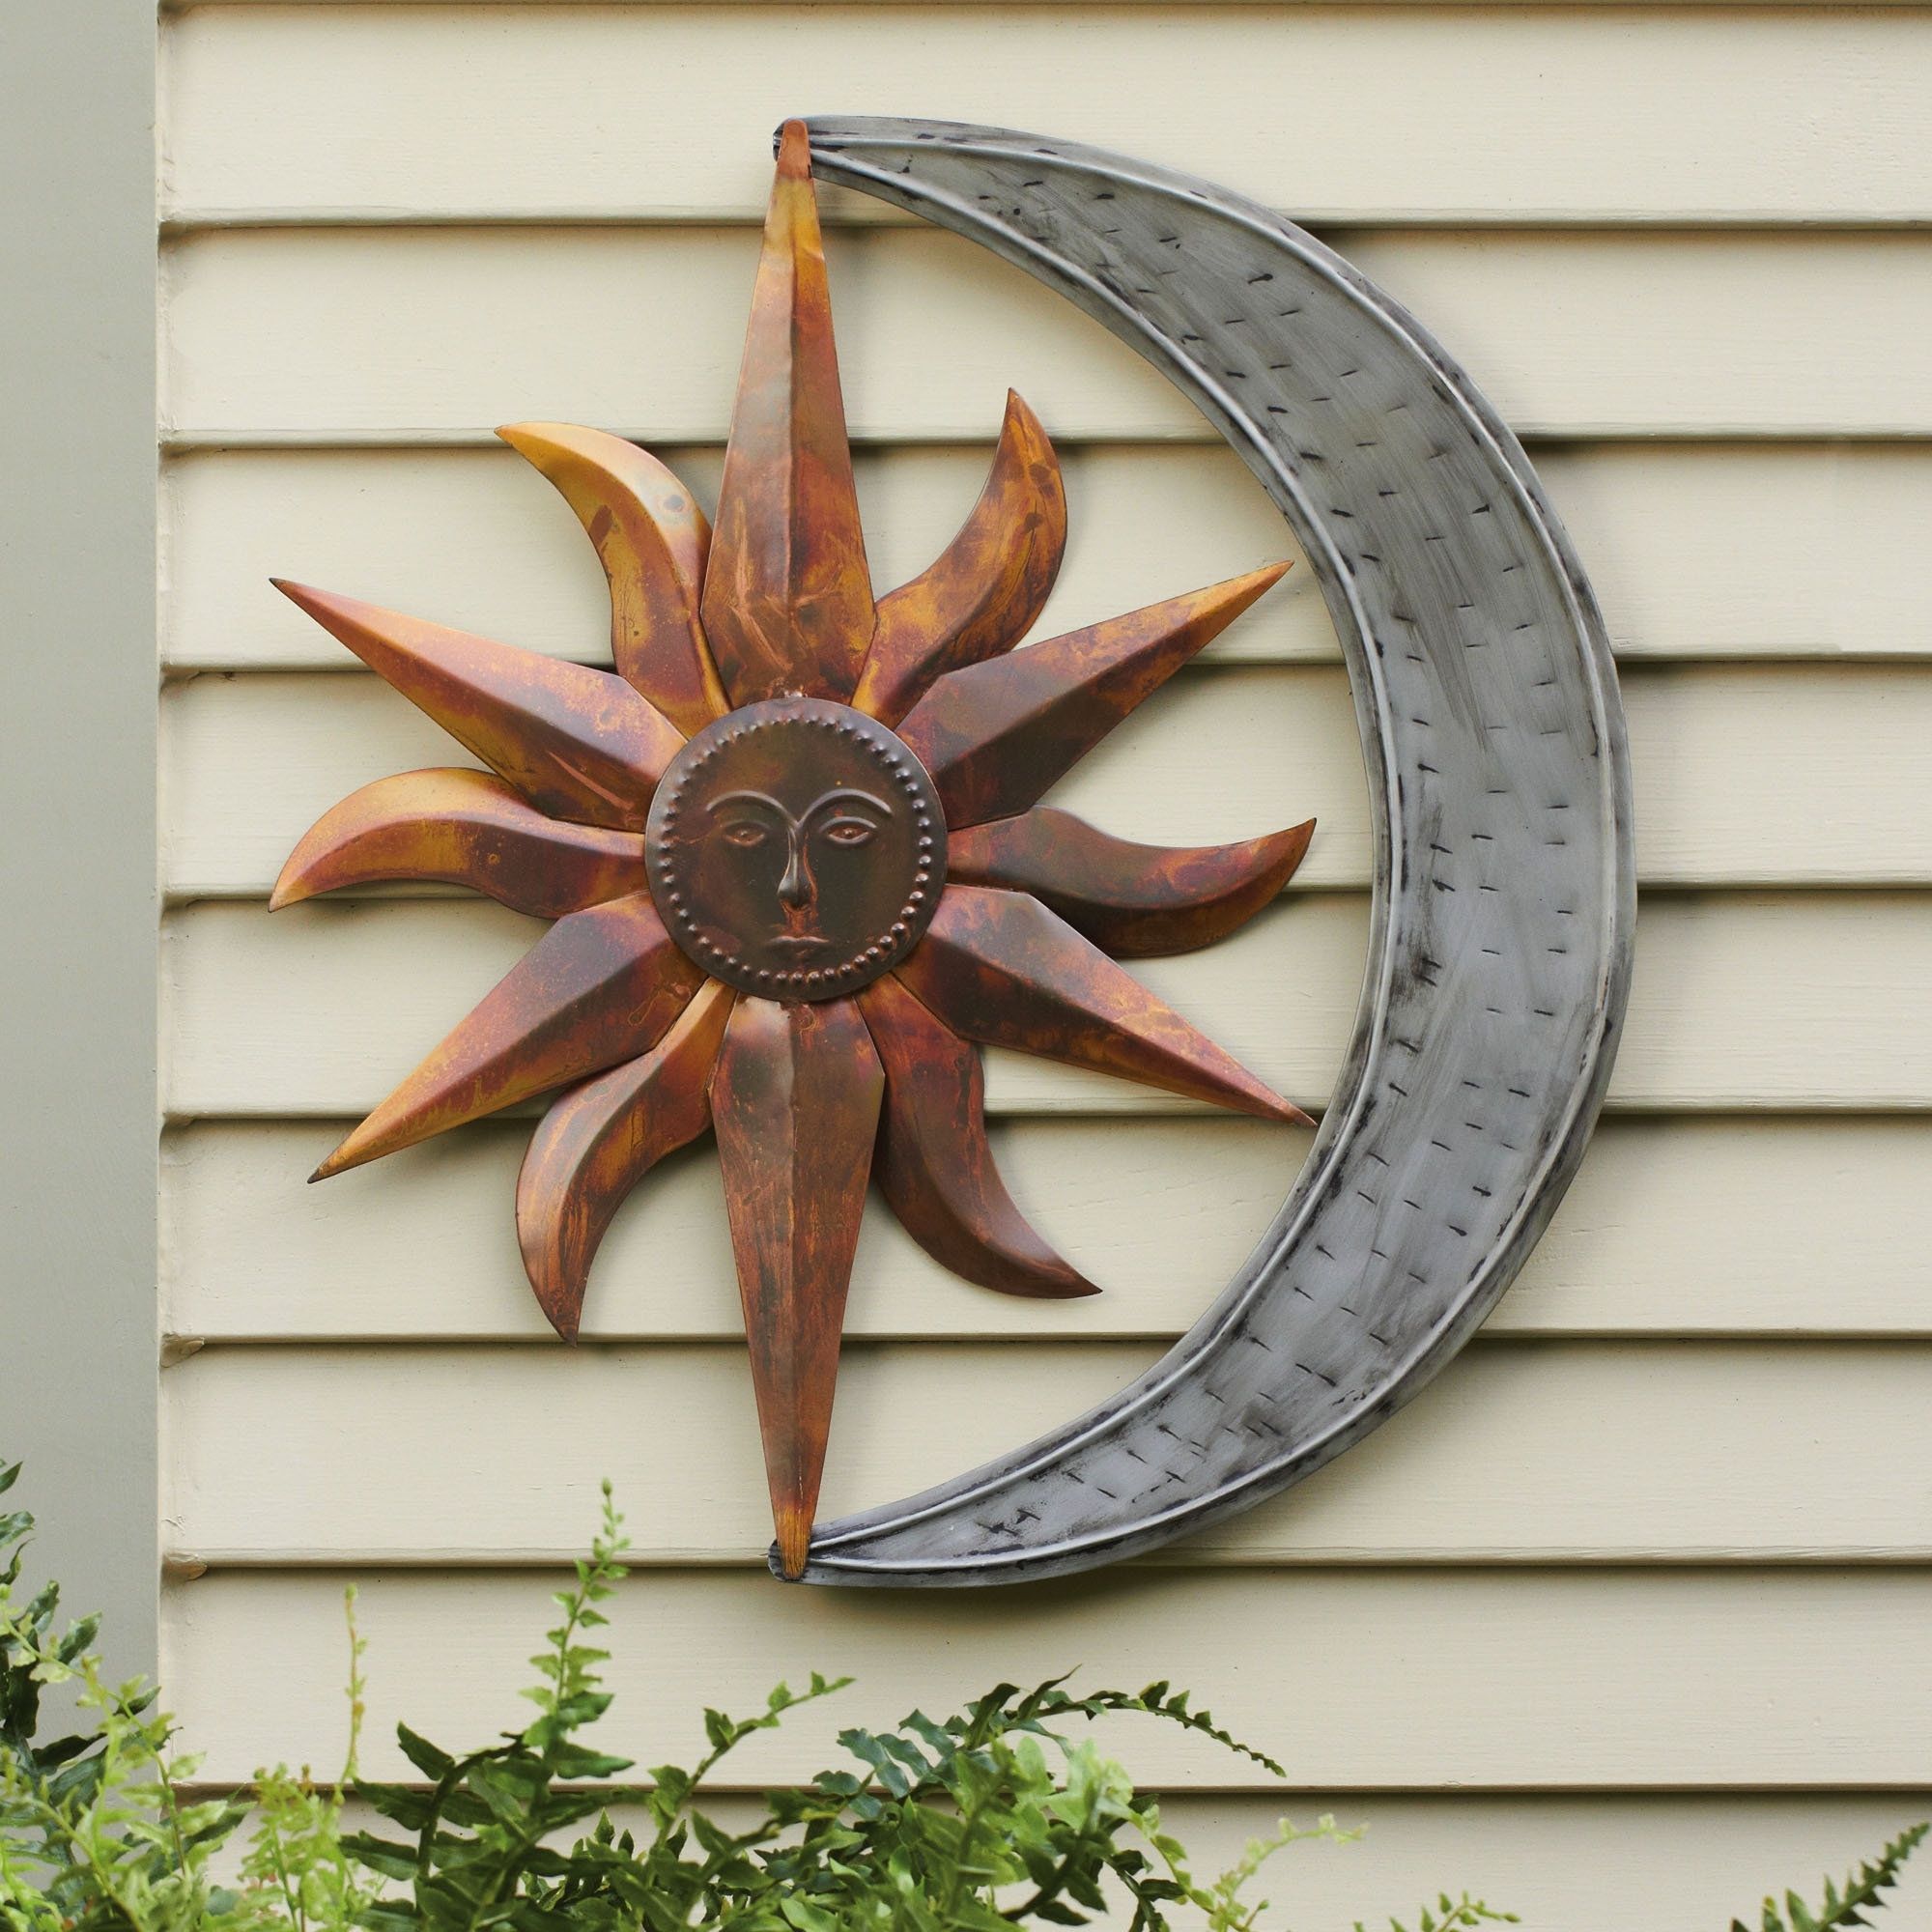 Good Looking Outdoor Wall Decor 18 Sun Art Lovely Rustic Indoor 30 Intended For Most Current Outdoor Sun Wall Art (View 5 of 15)